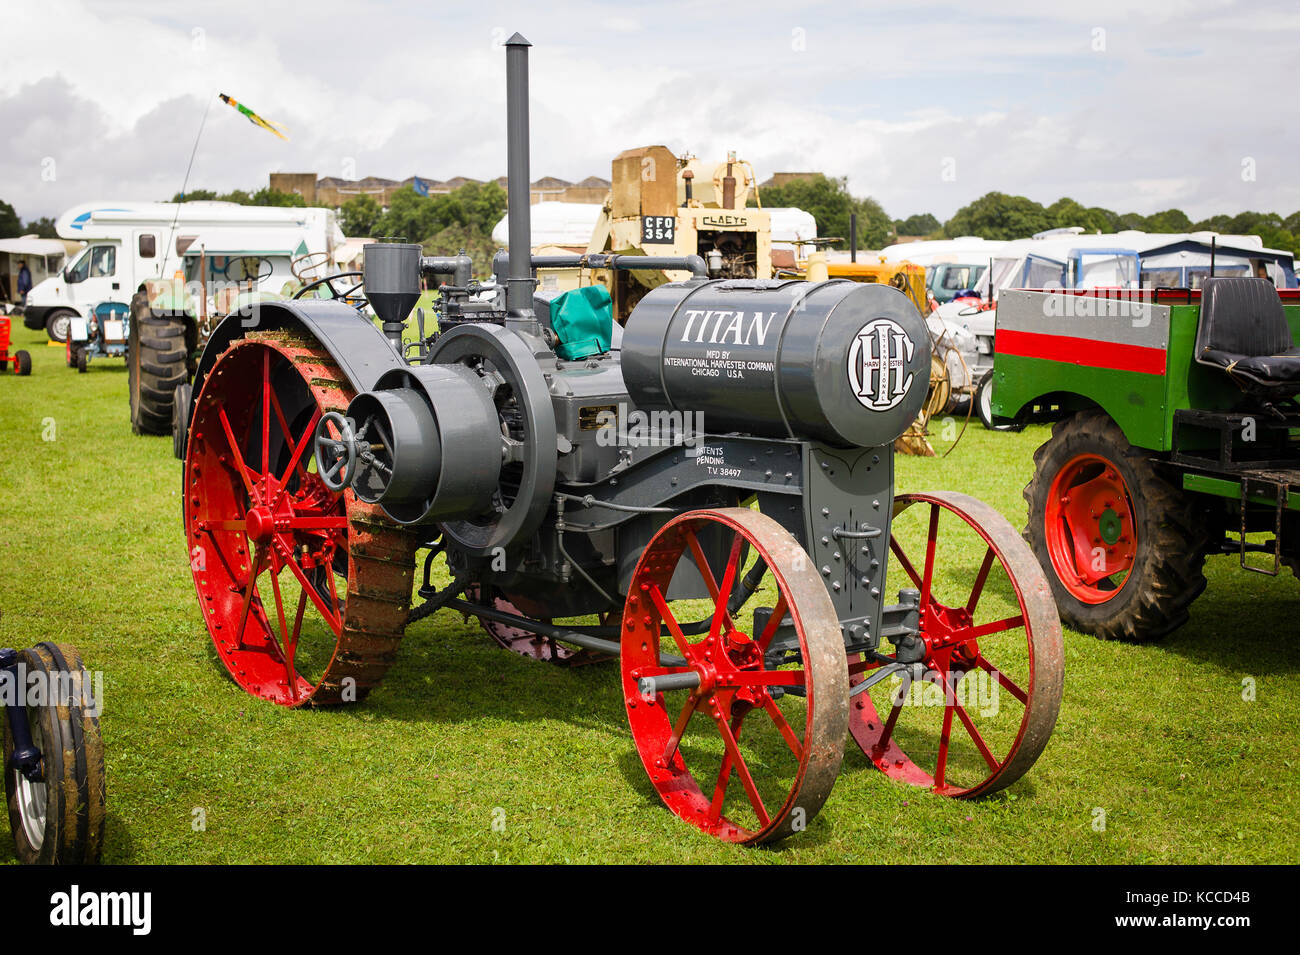 International Harvester Company Titan tractor on display at an English show Stock Photo